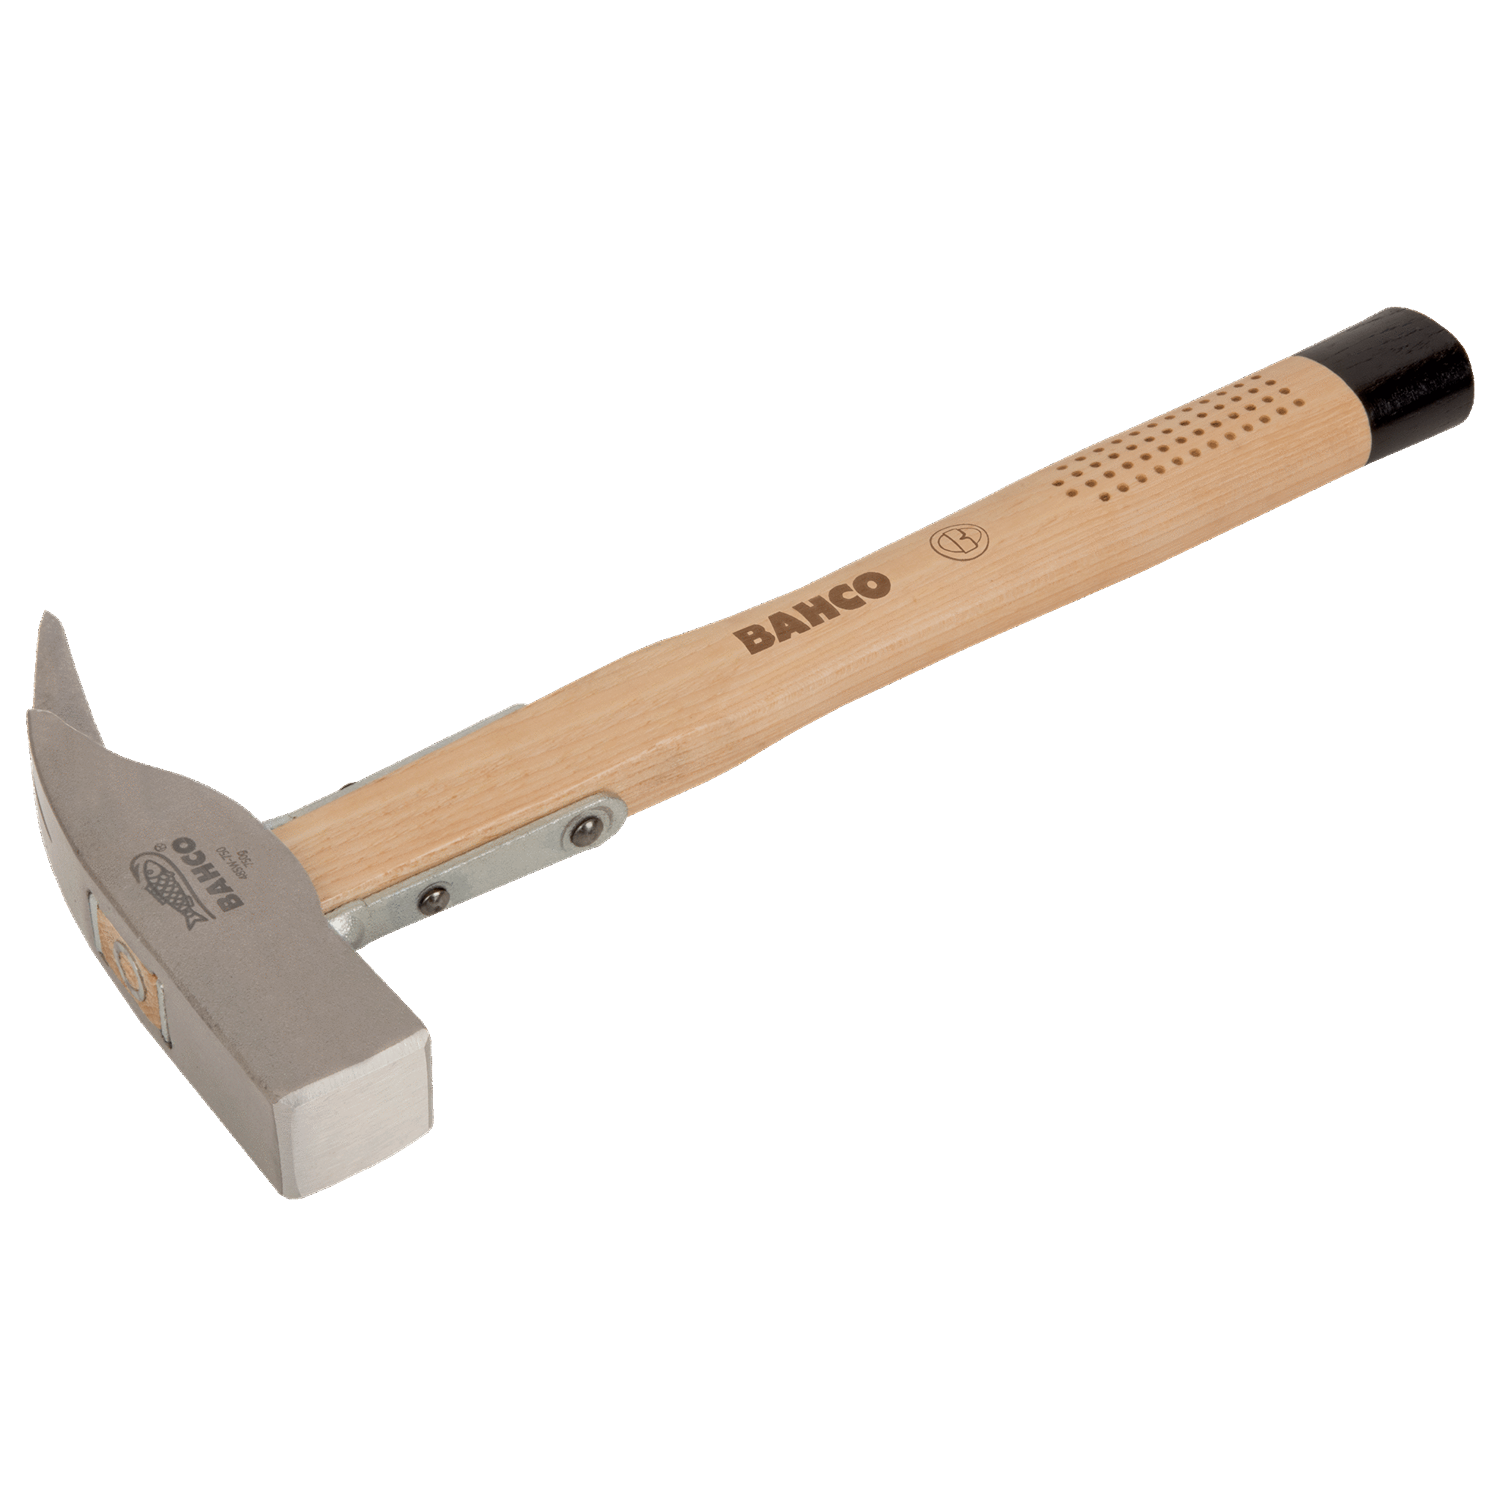 BAHCO 485W Carpenter Hammer Spike Claw with Forged Head - Premium Carpenter Hammer from BAHCO - Shop now at Yew Aik.